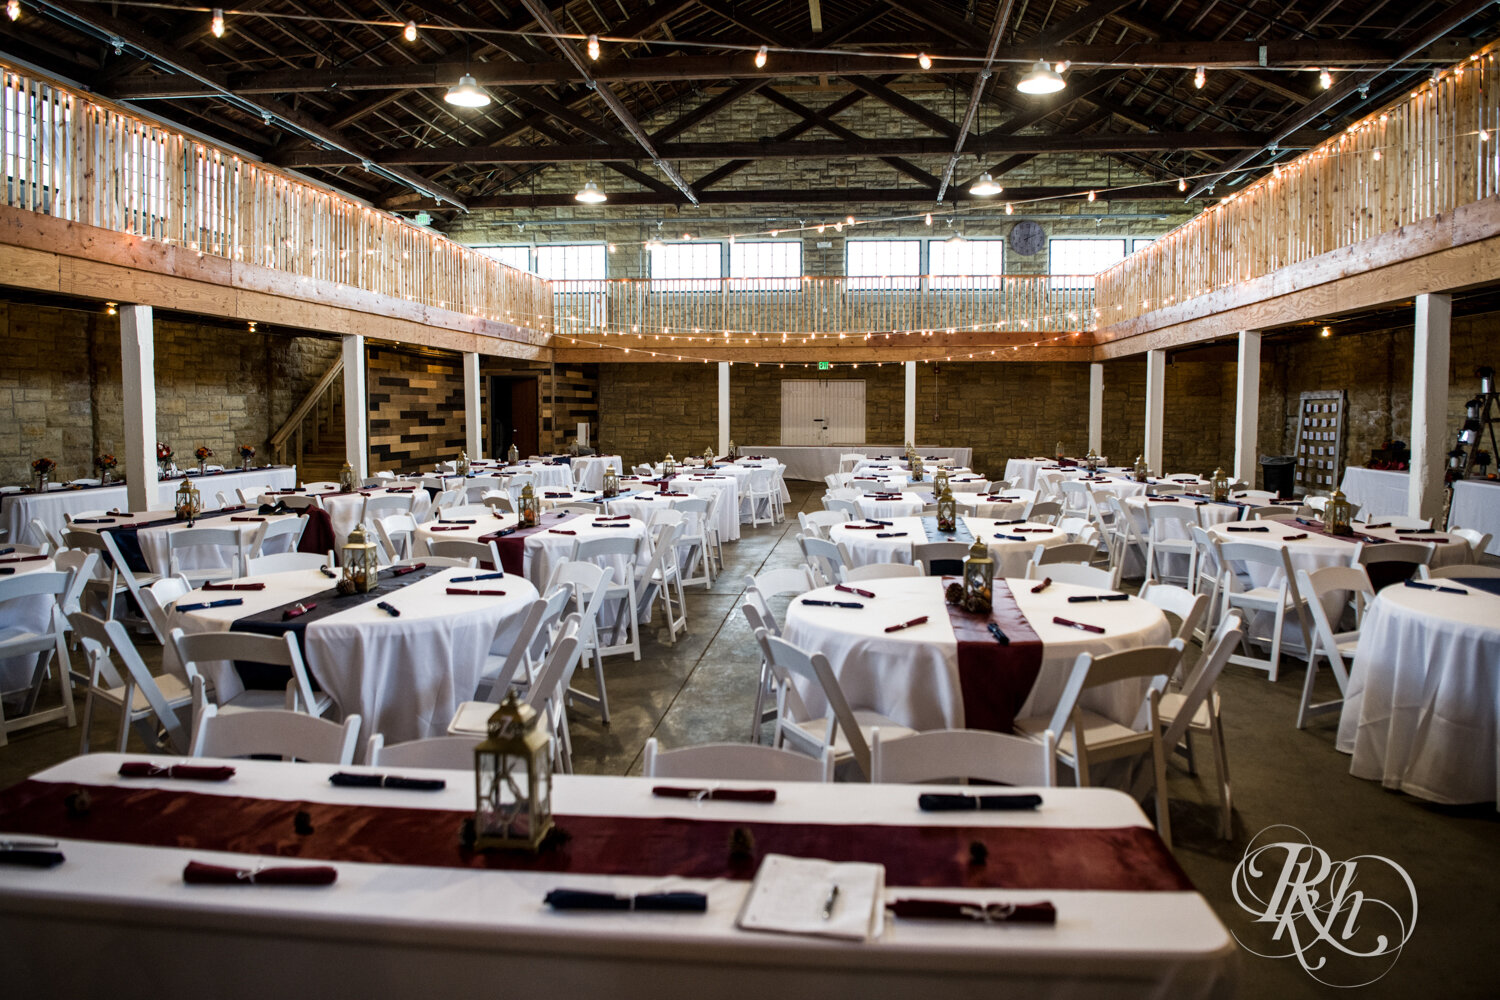 Indoor wedding reception layout at Olmsted County Fairgrounds in Rochester, Minnesota.